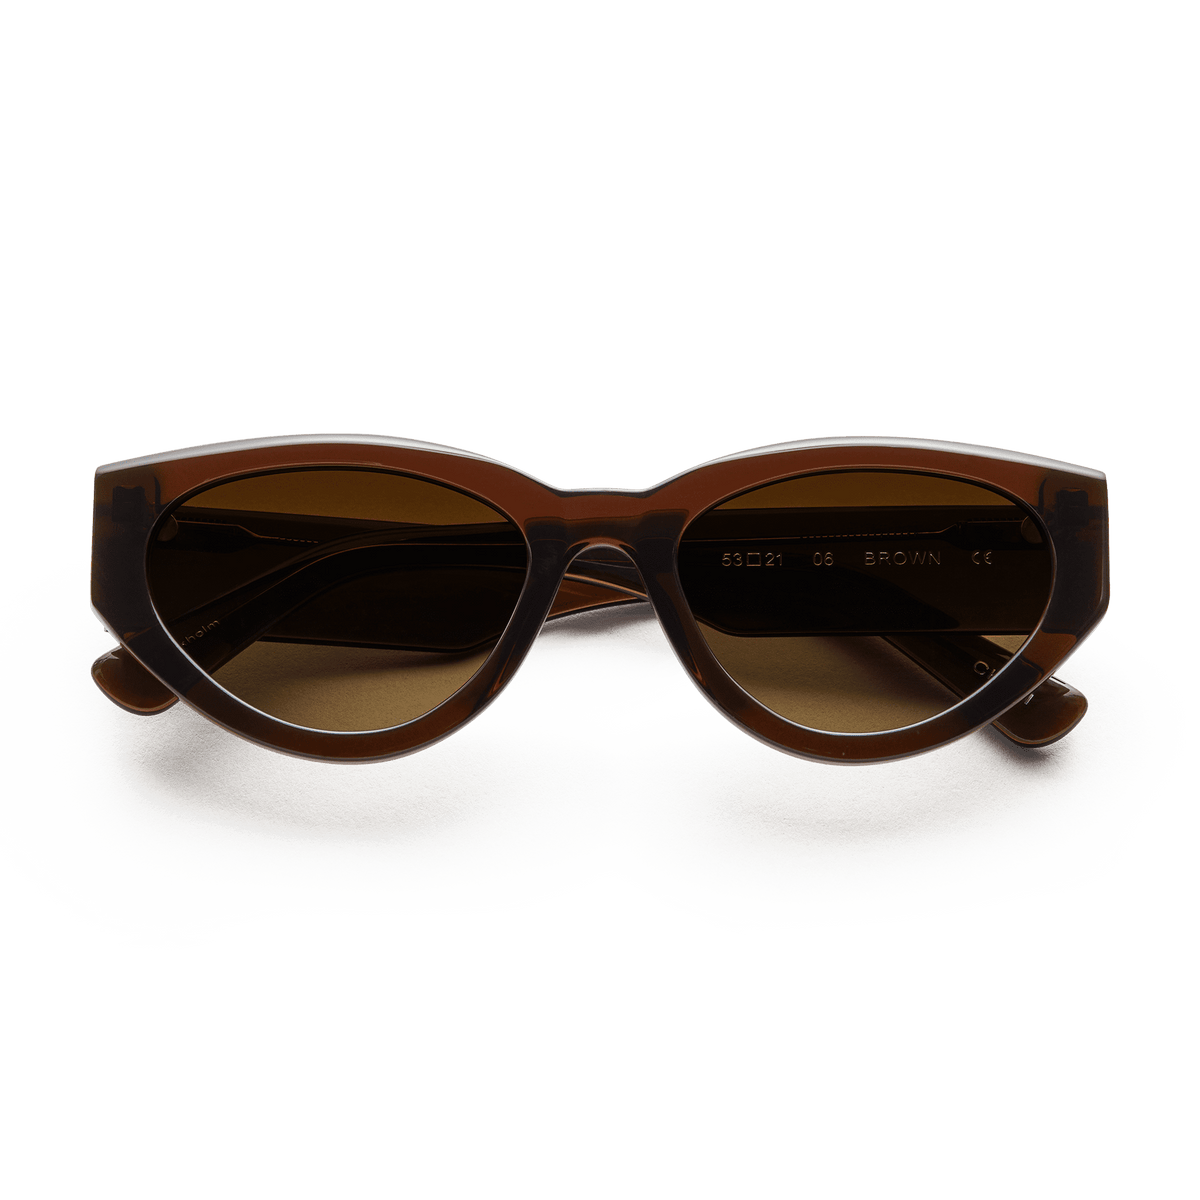 Brown cat eye sunglasses with brown lens